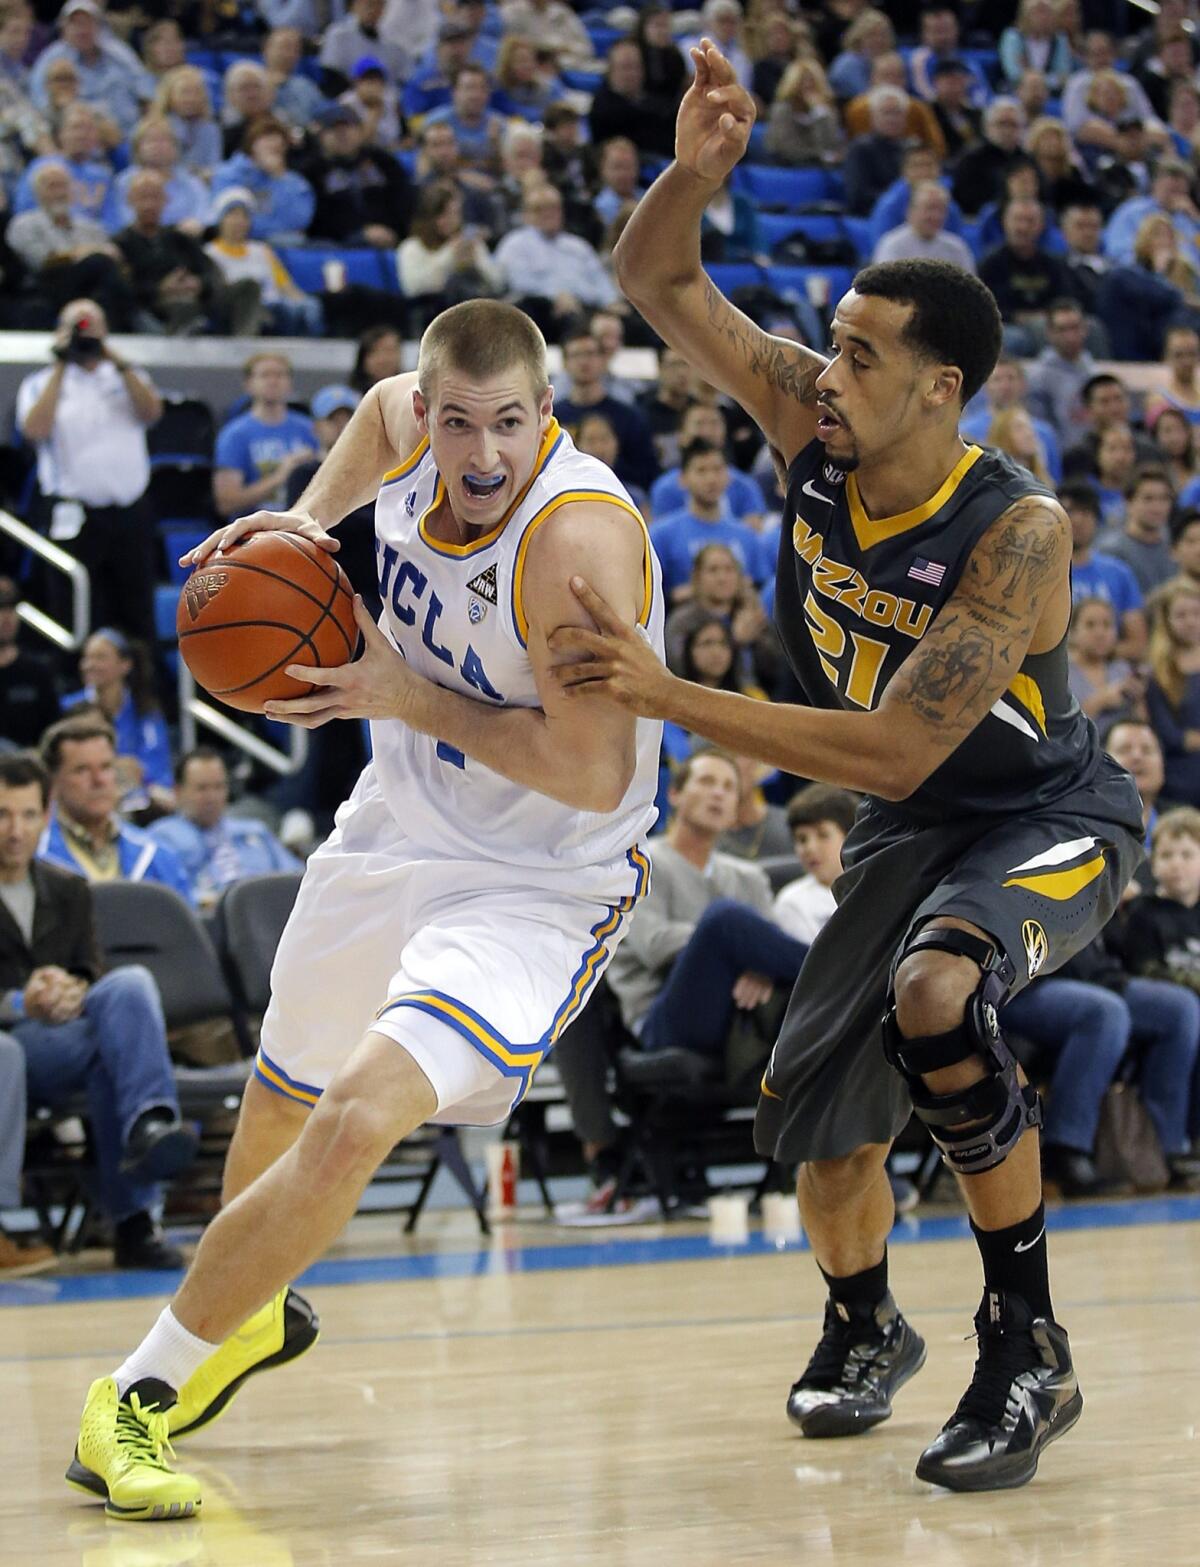 UCLA forward Travis Wear has been diagnosed with appendicitis.